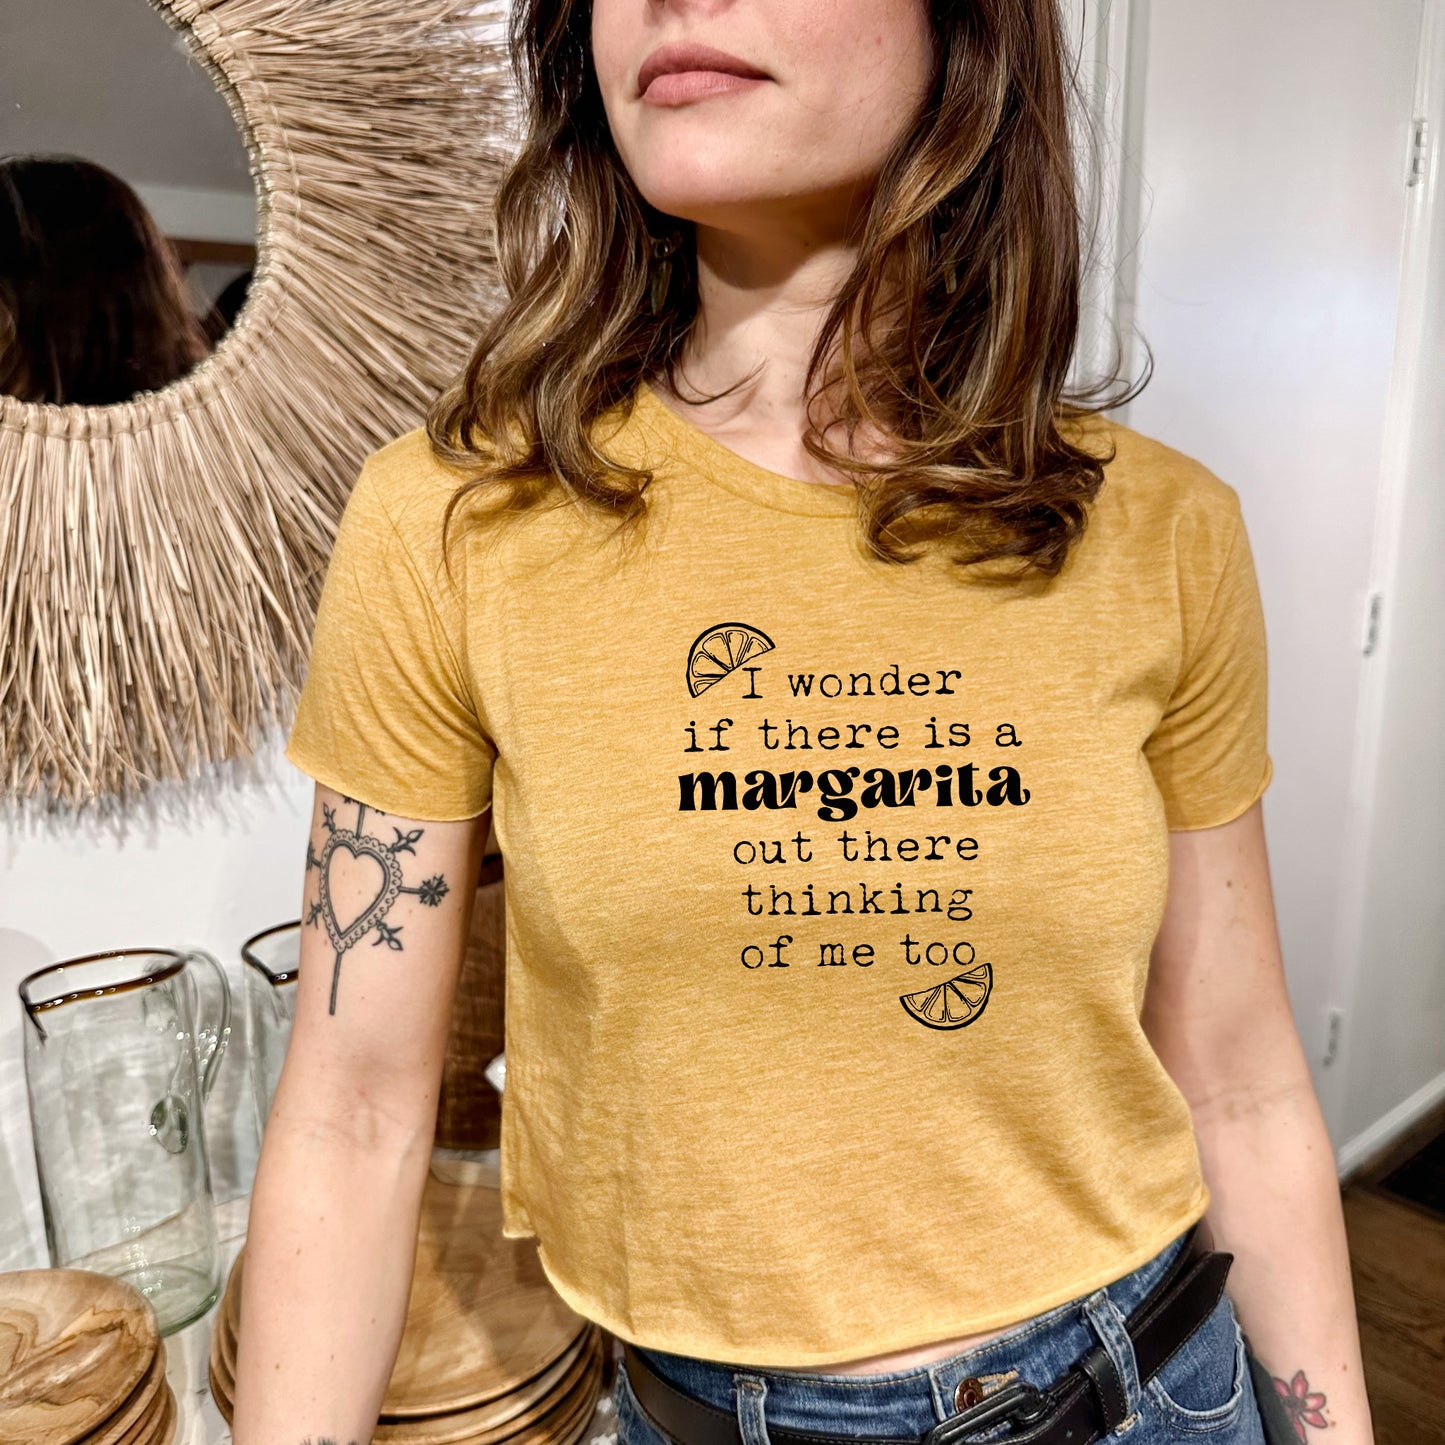 I Wonder If There Is A Margarita Out There Thinking Of Me Too - Women's Crop Tee - Heather Gray or Gold